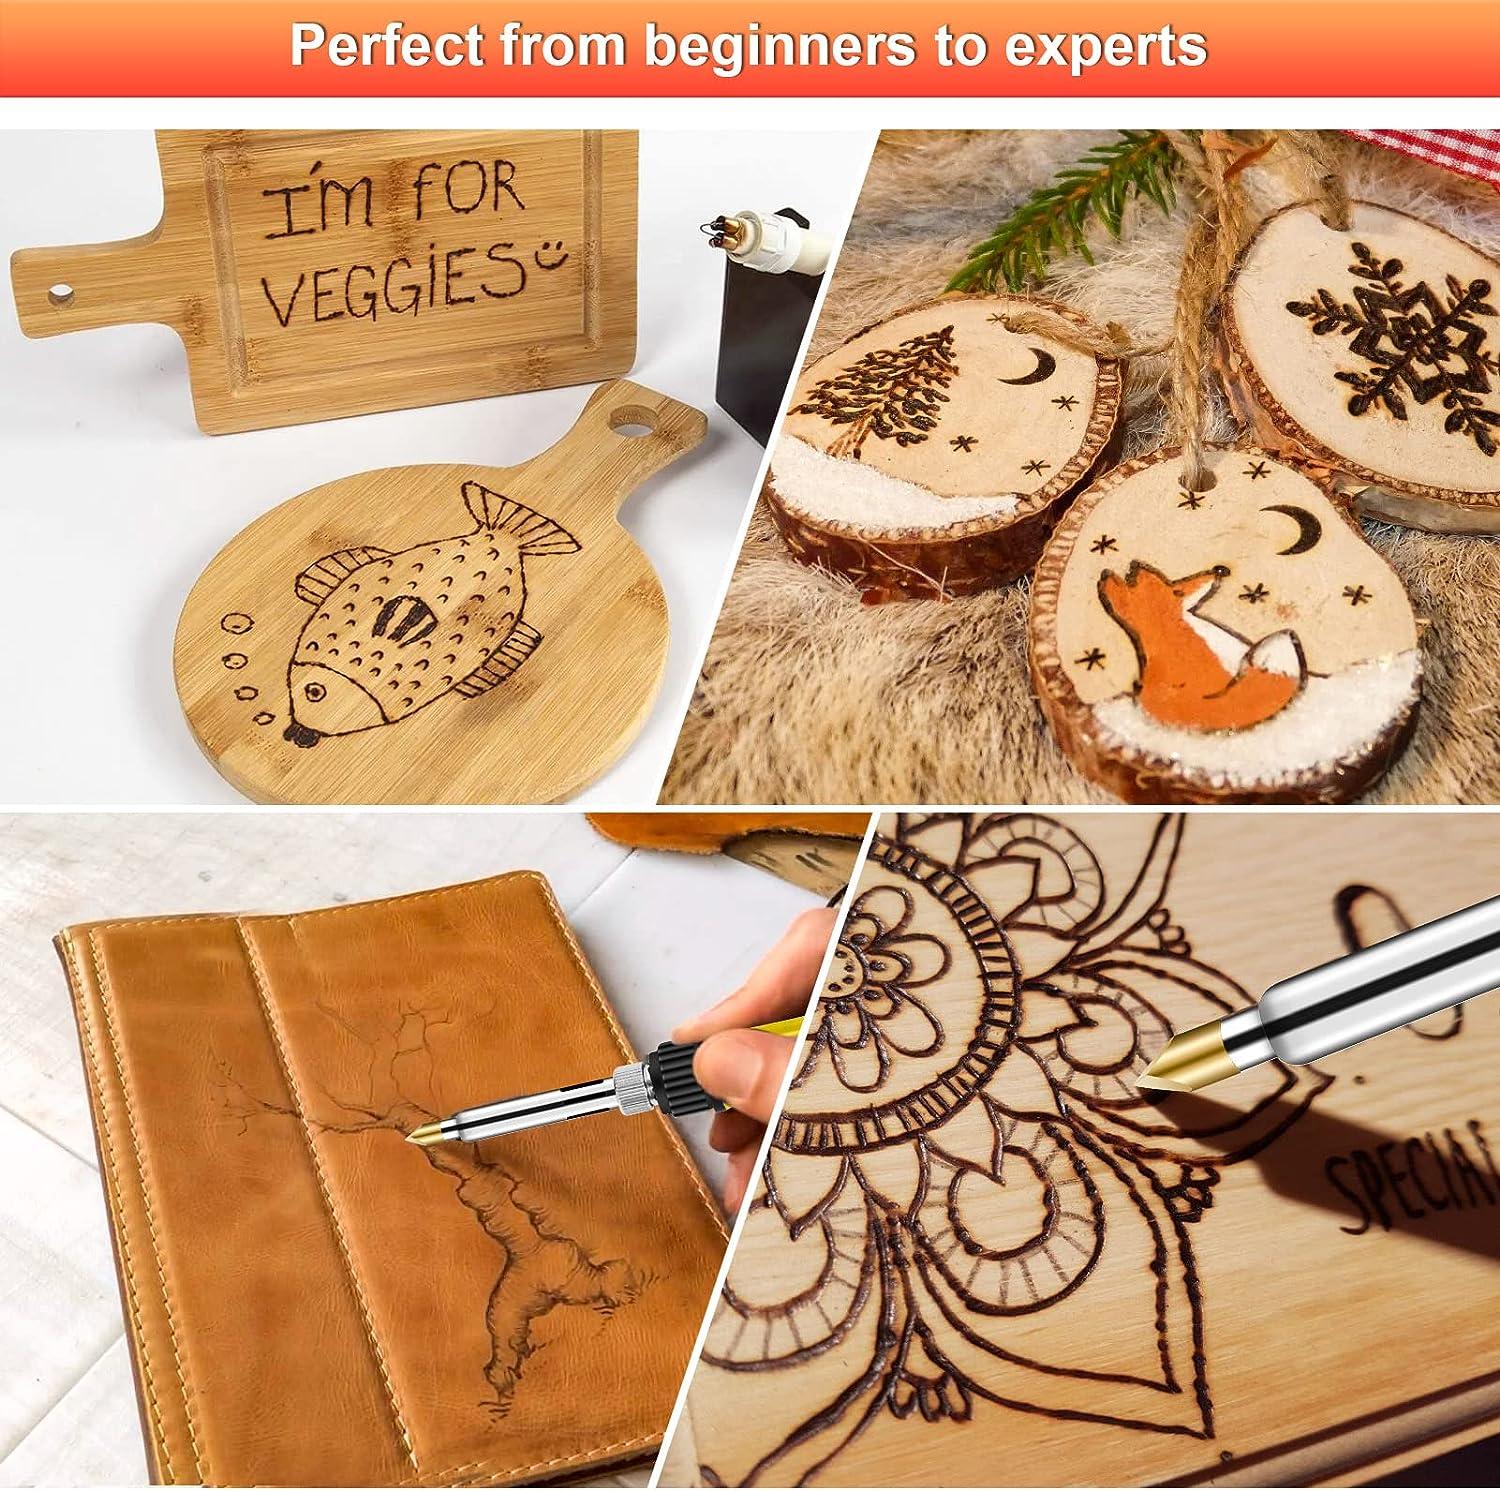 DIY Inspiration for Wood Burning Tool and Giveaway  Wood burning kits, Diy  giveaway, Woodburning projects